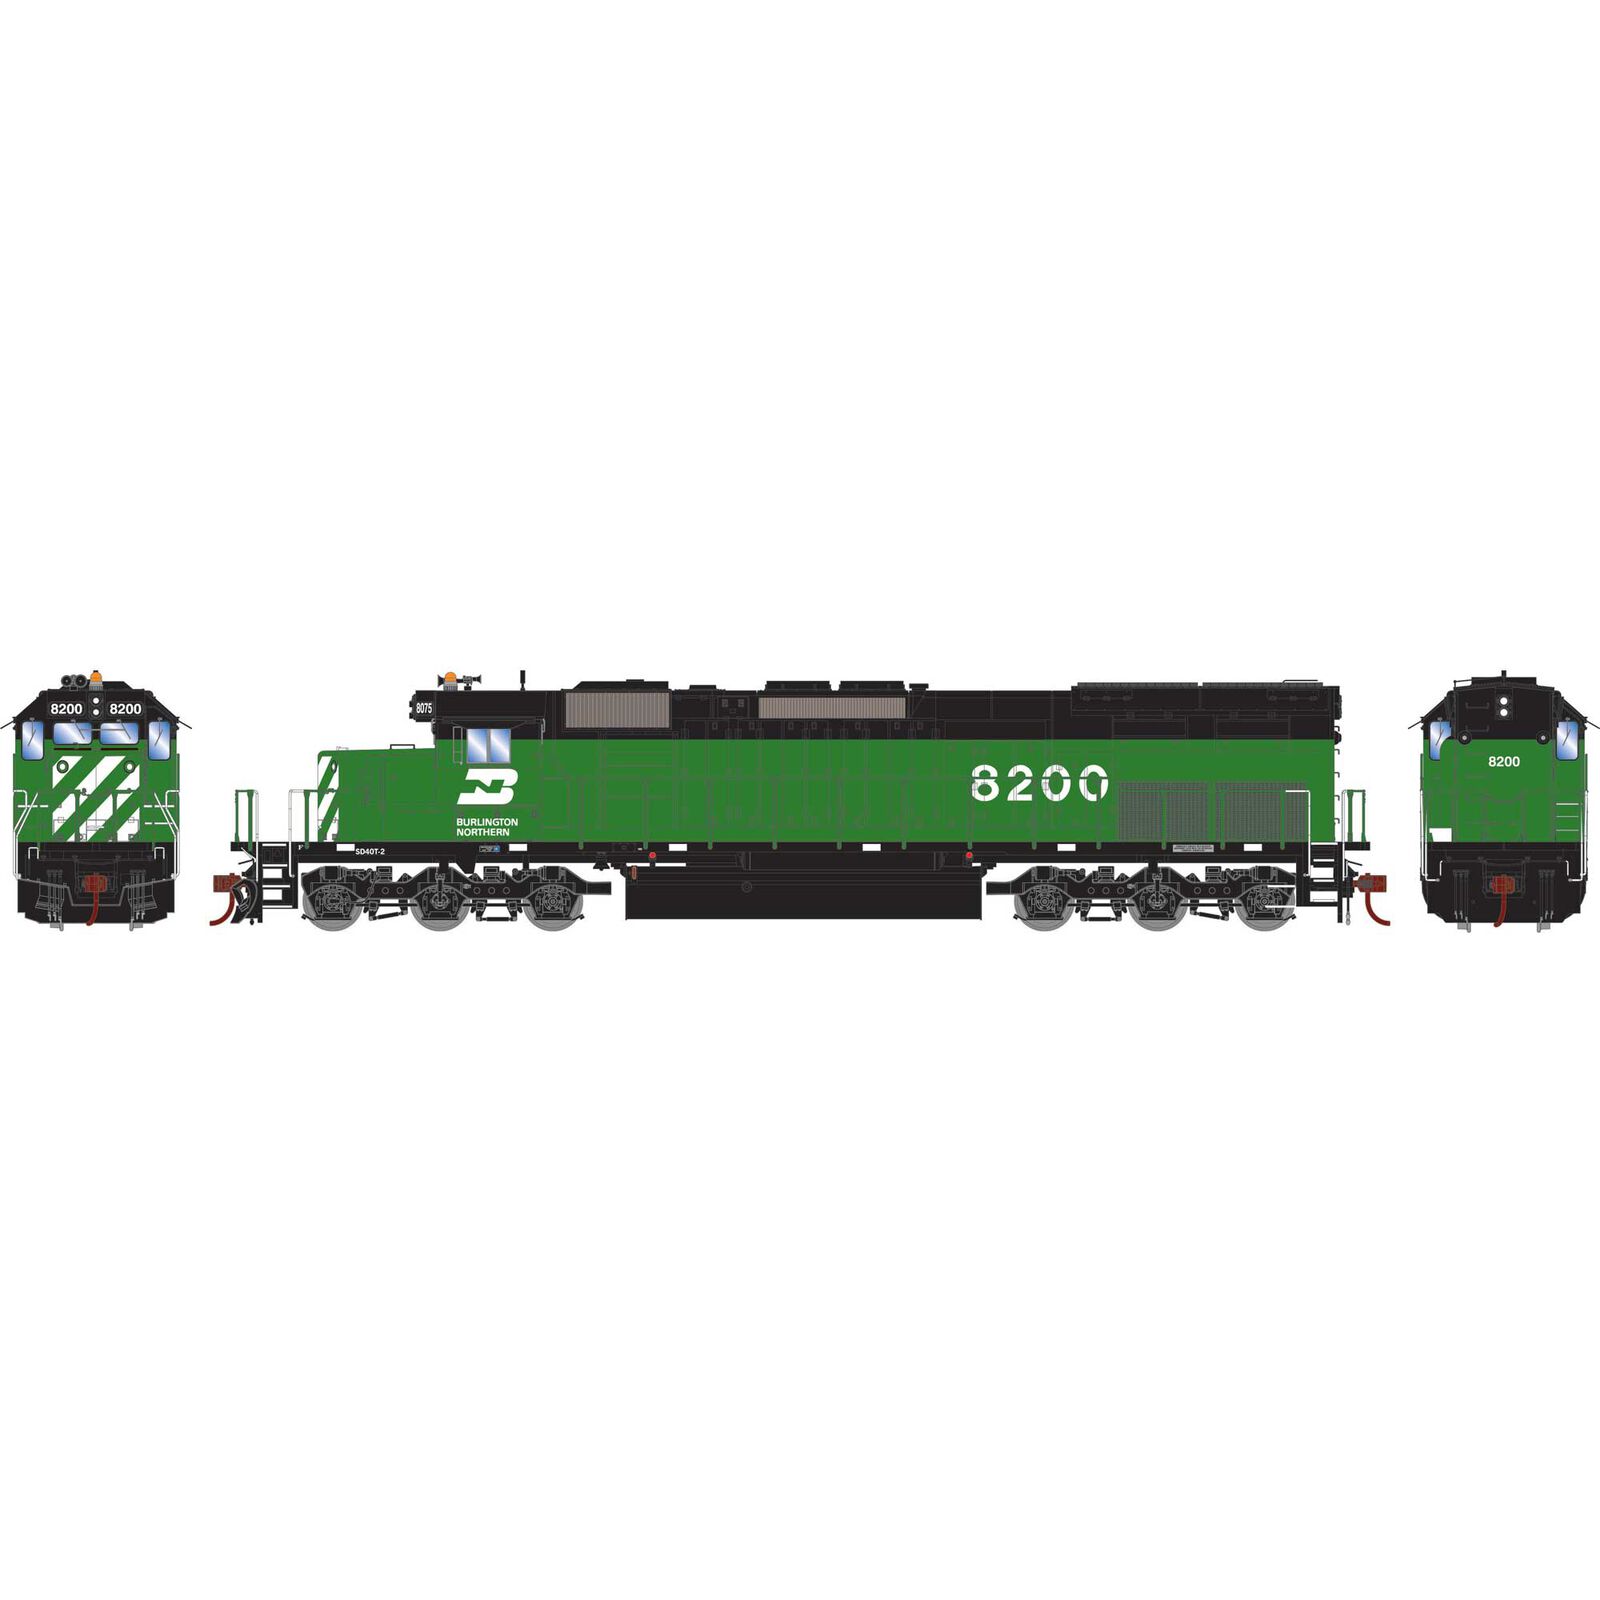 HO SD40T-2 Locomotive with DCC & Sound, LL BN #8200